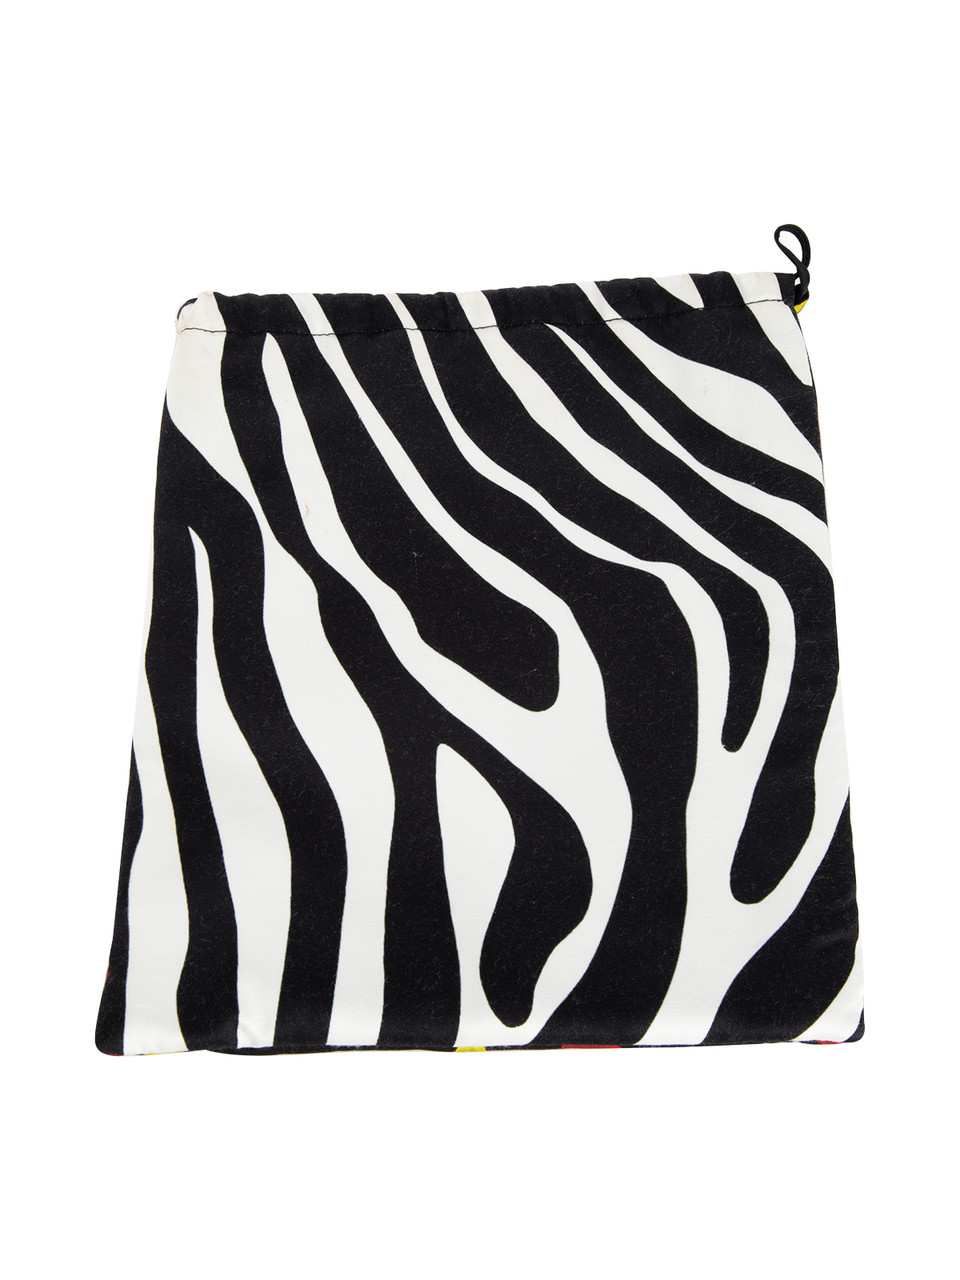 Attico Rose and Zebra Patterned Pouch